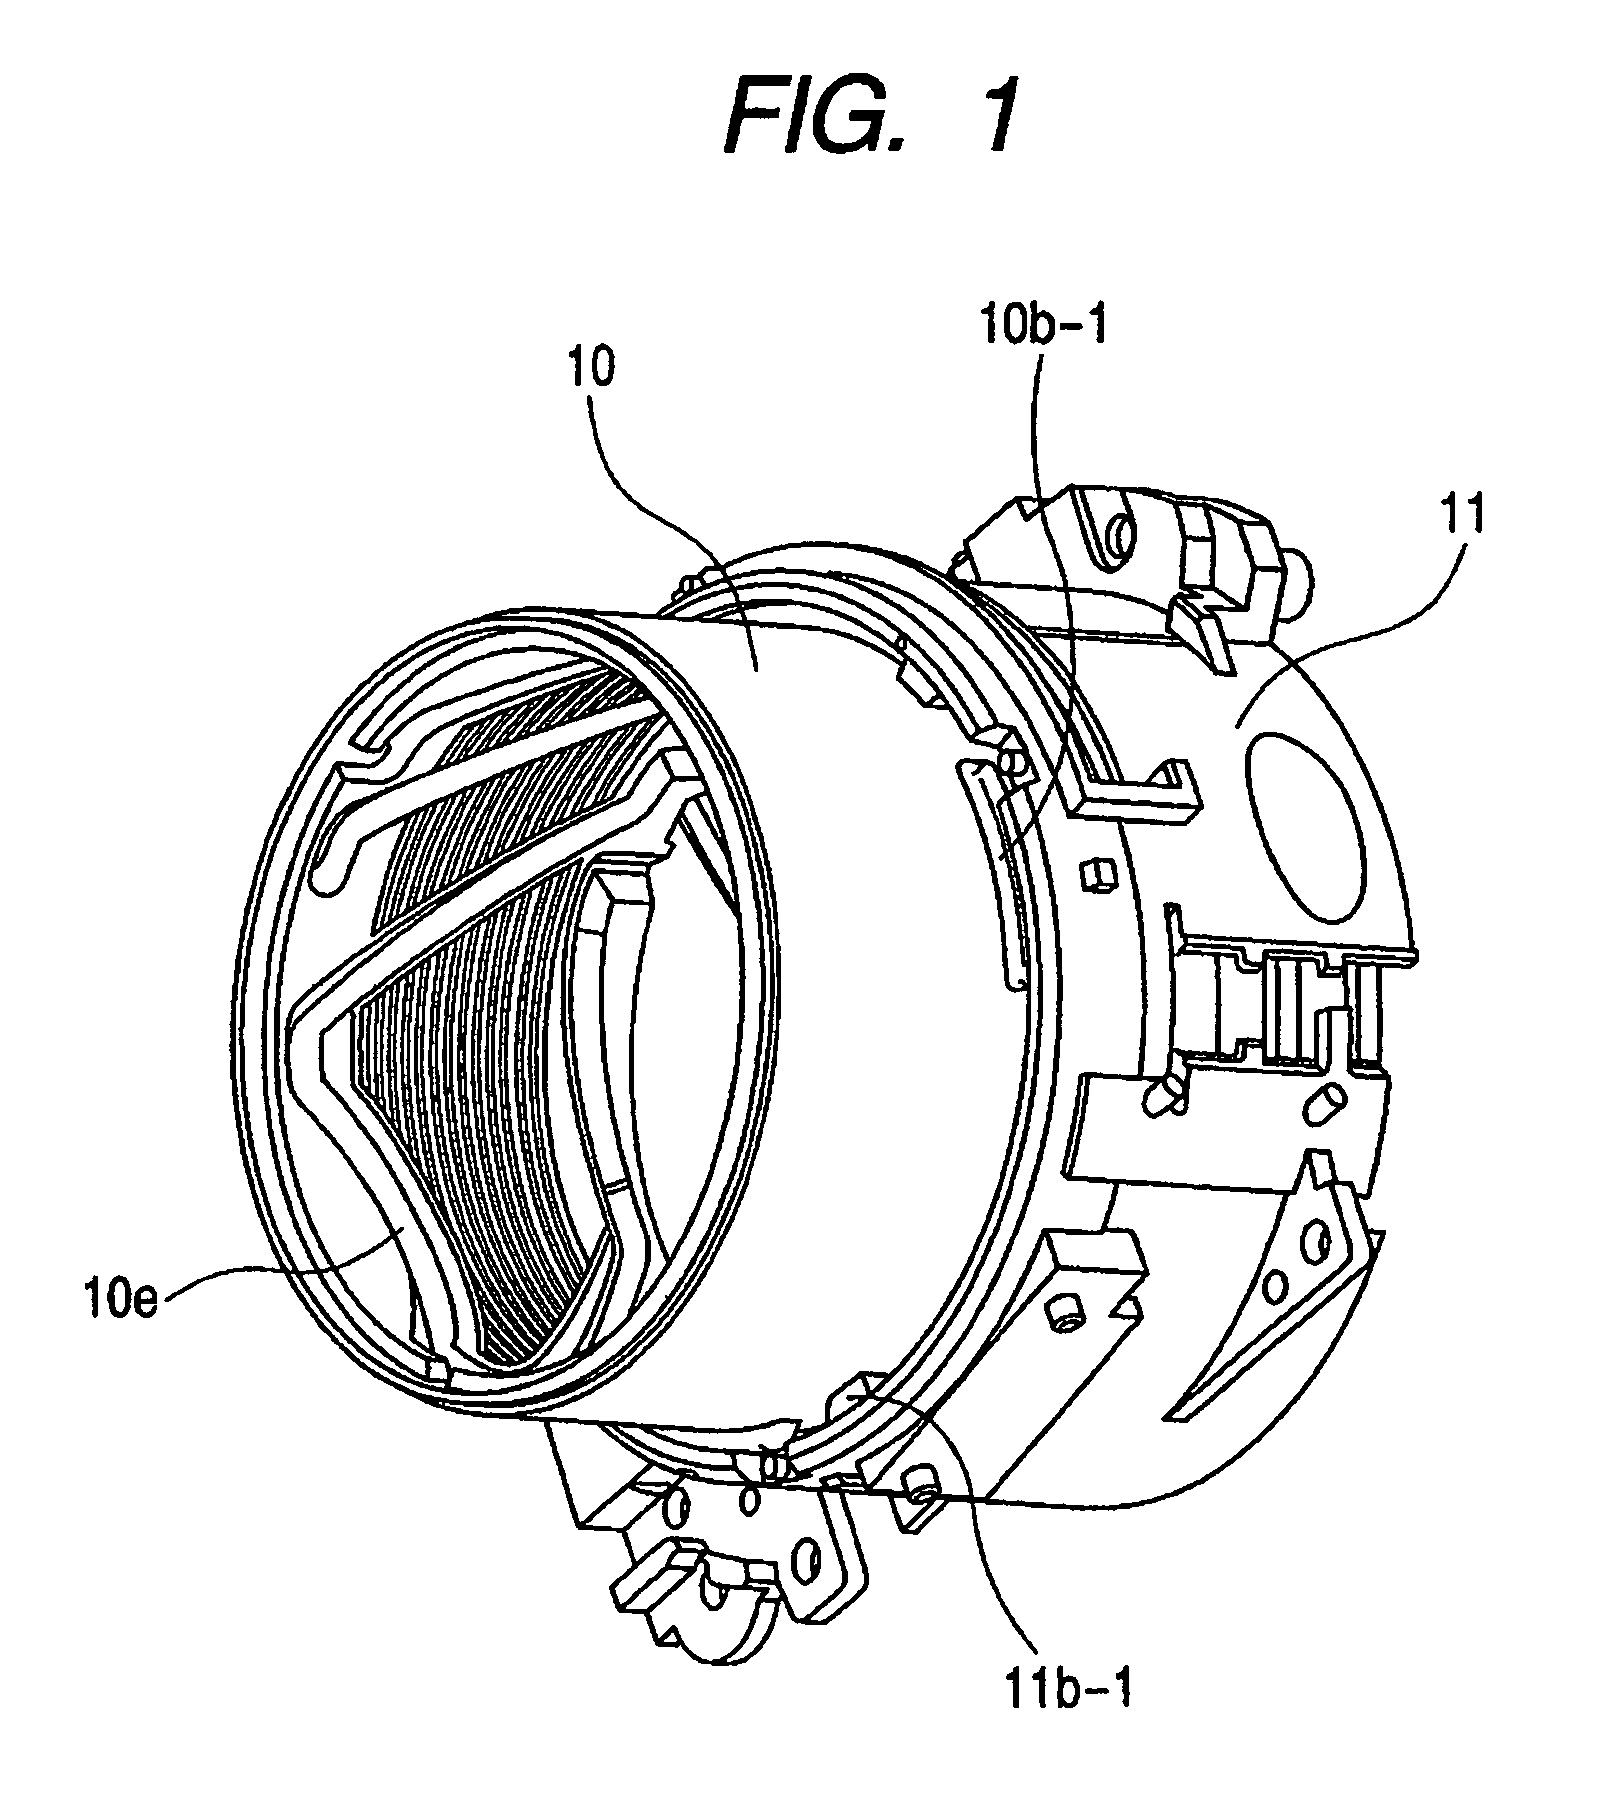 Optical apparatus such as digital still camera, video camera, and interchangeable lens